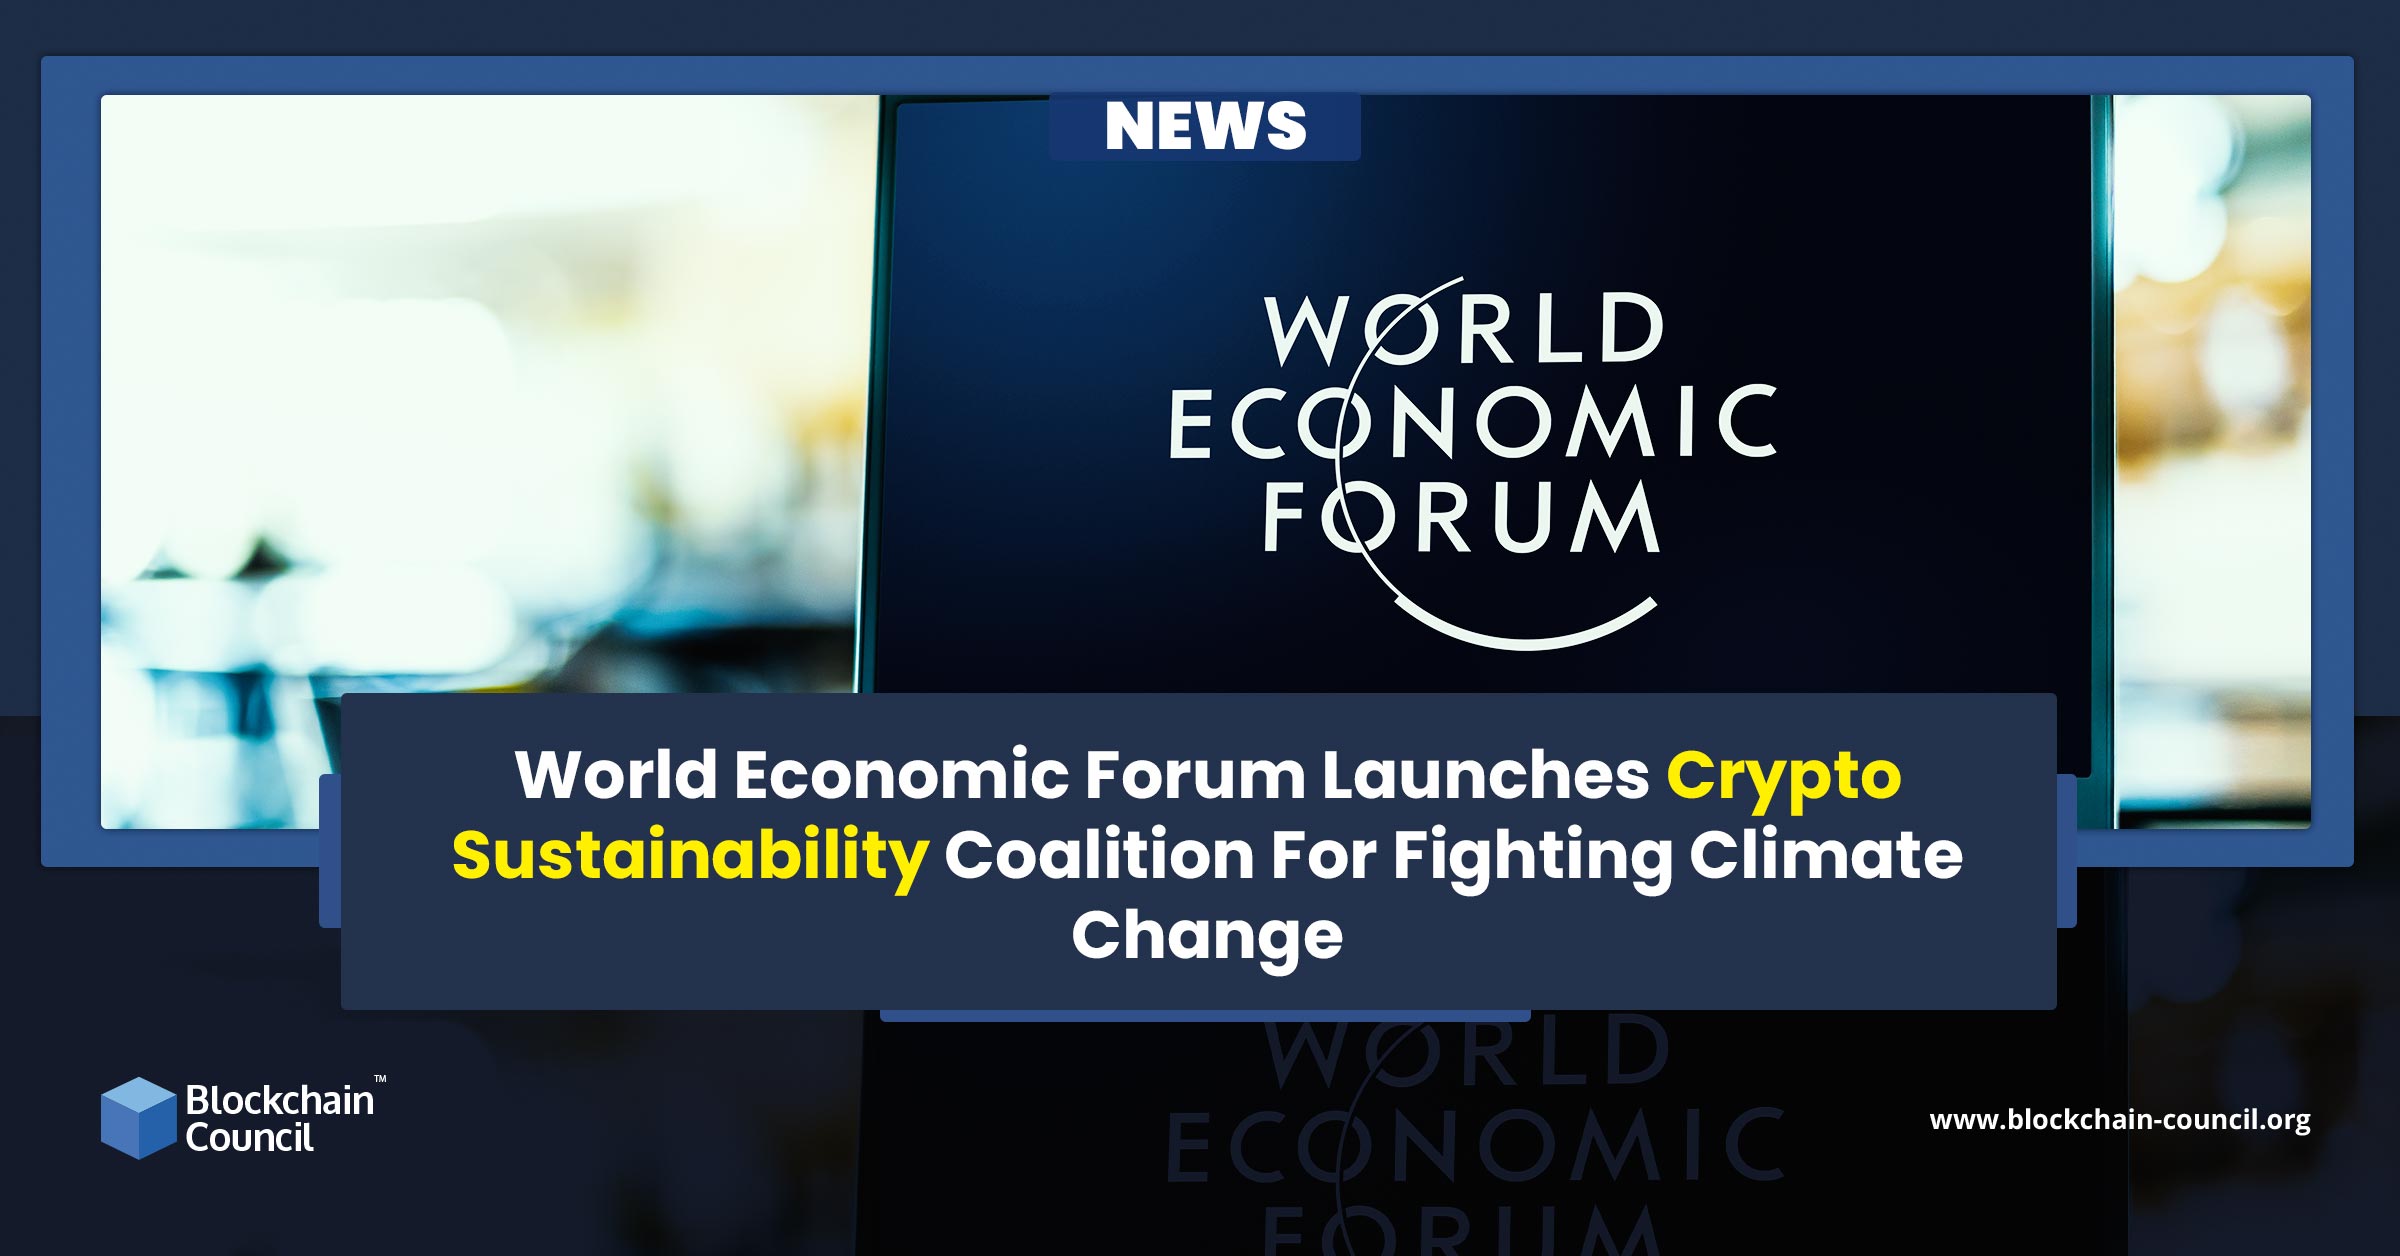 World Economic Forum Launches Crypto Sustainability Coalition For Fighting Climate Change